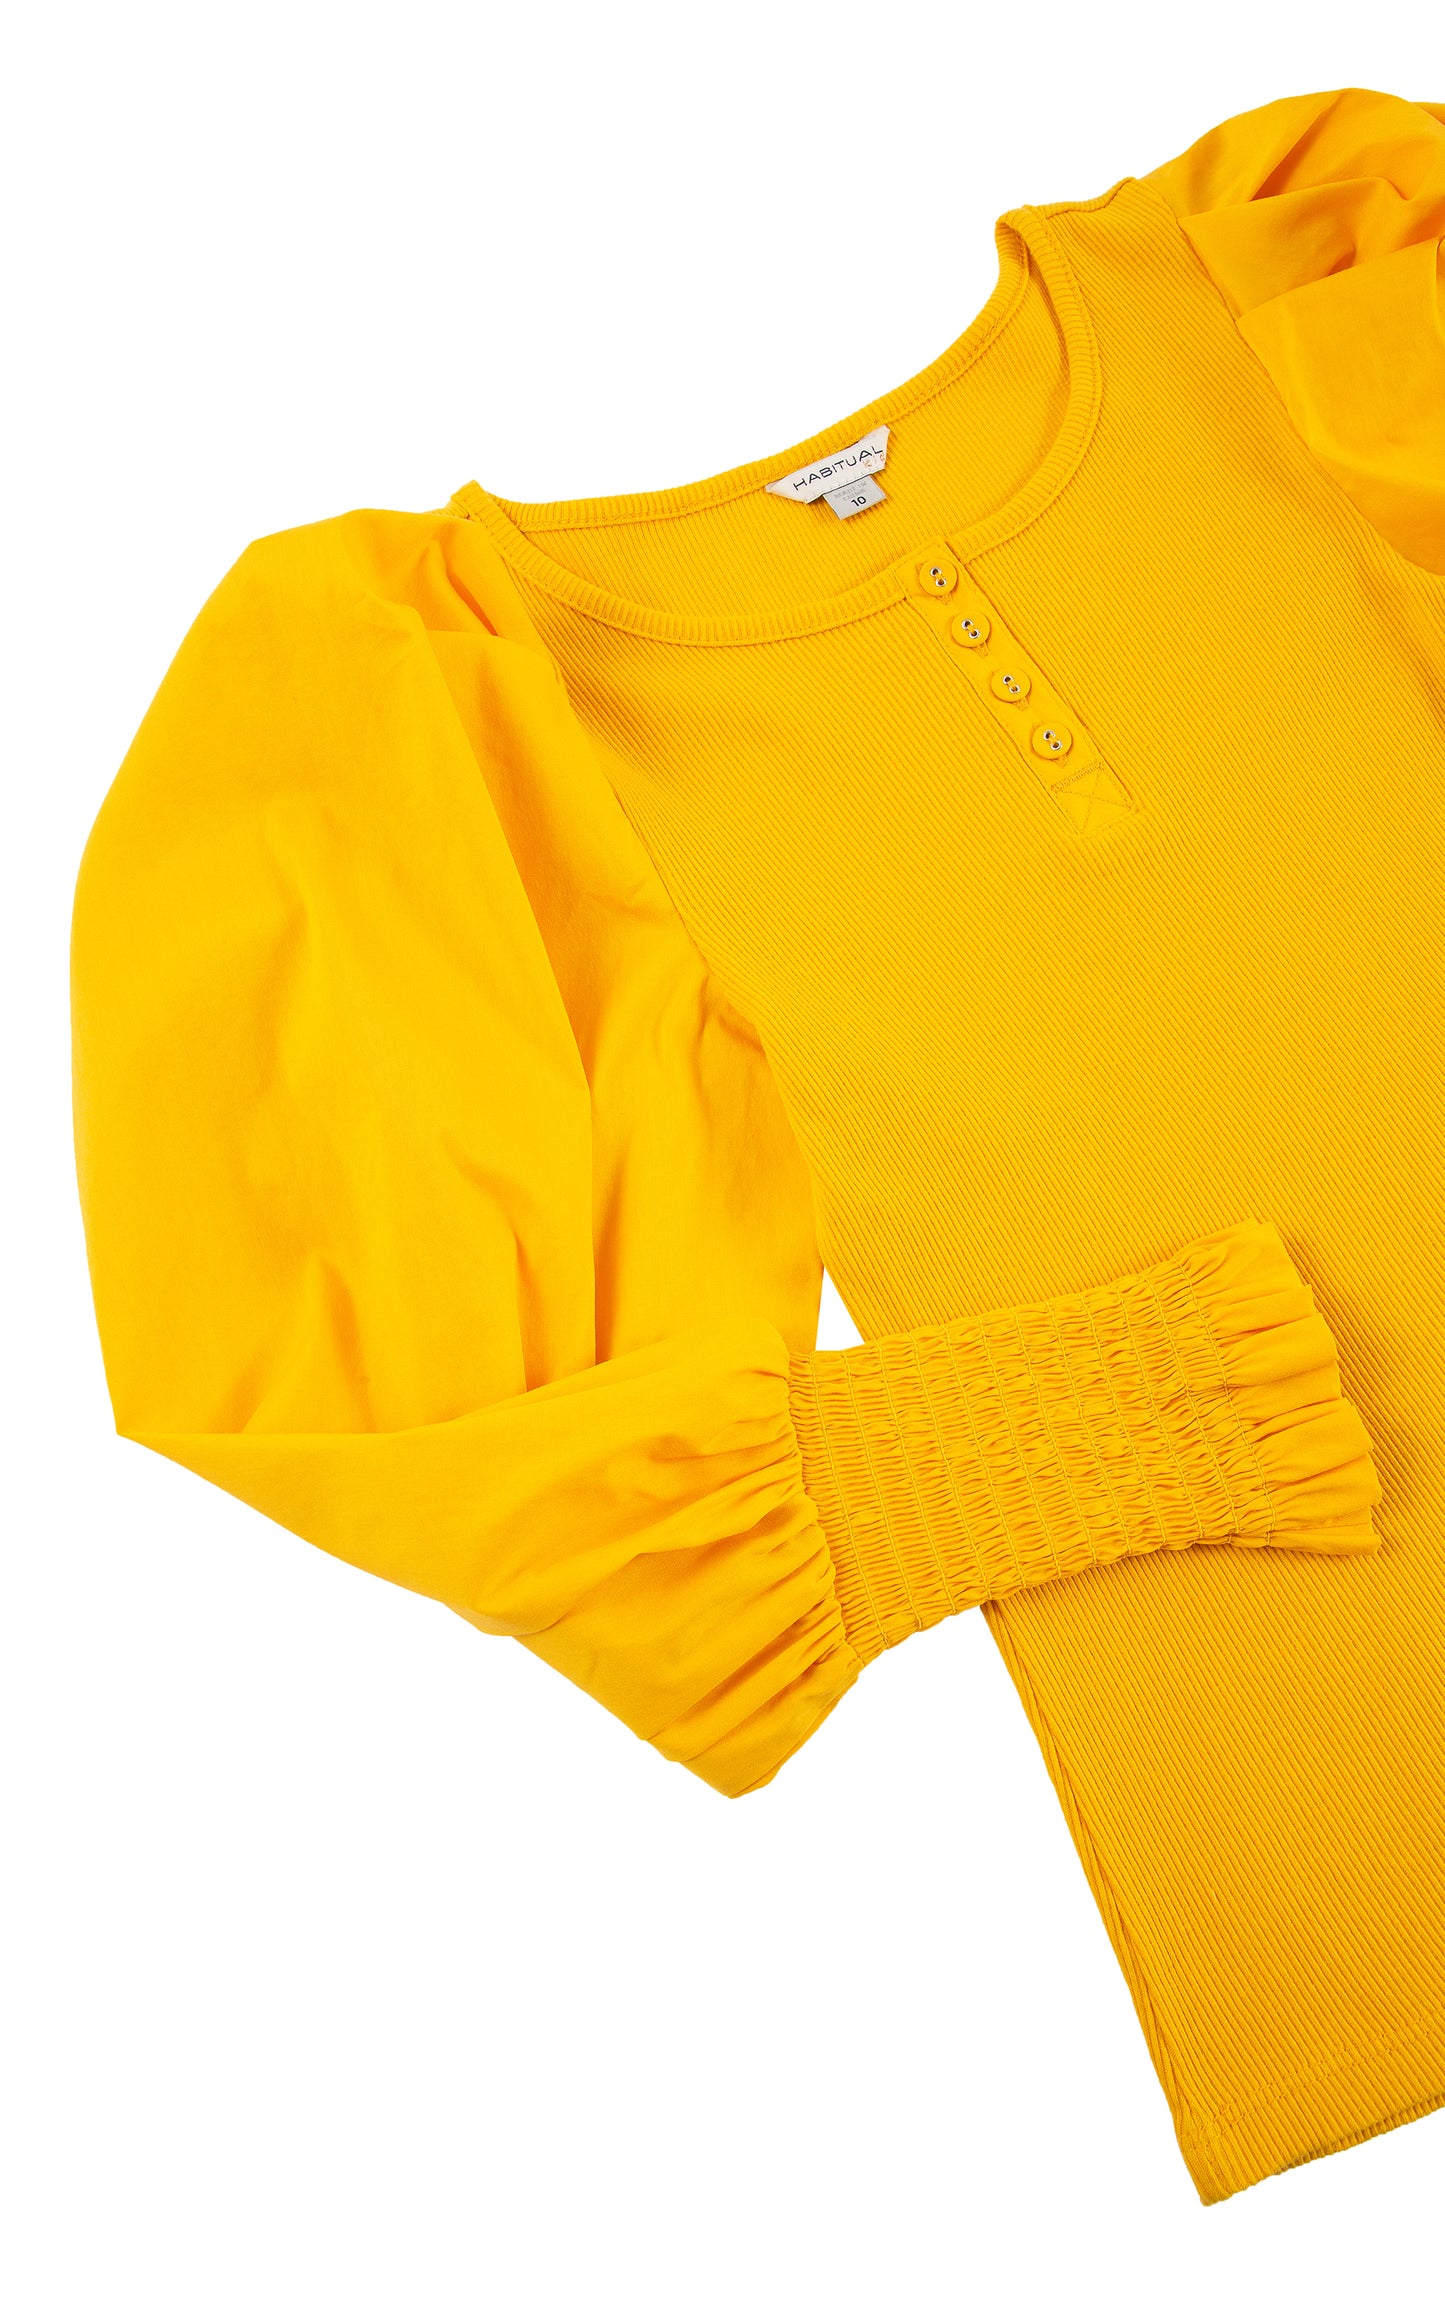 CLOSE UP OF YELLOW  LONG-SLEEVE TOP WITH FOUR BUTTONS AT THE COLLAR, PUFFY SLEEVES, AND SMOCKED CUFFS